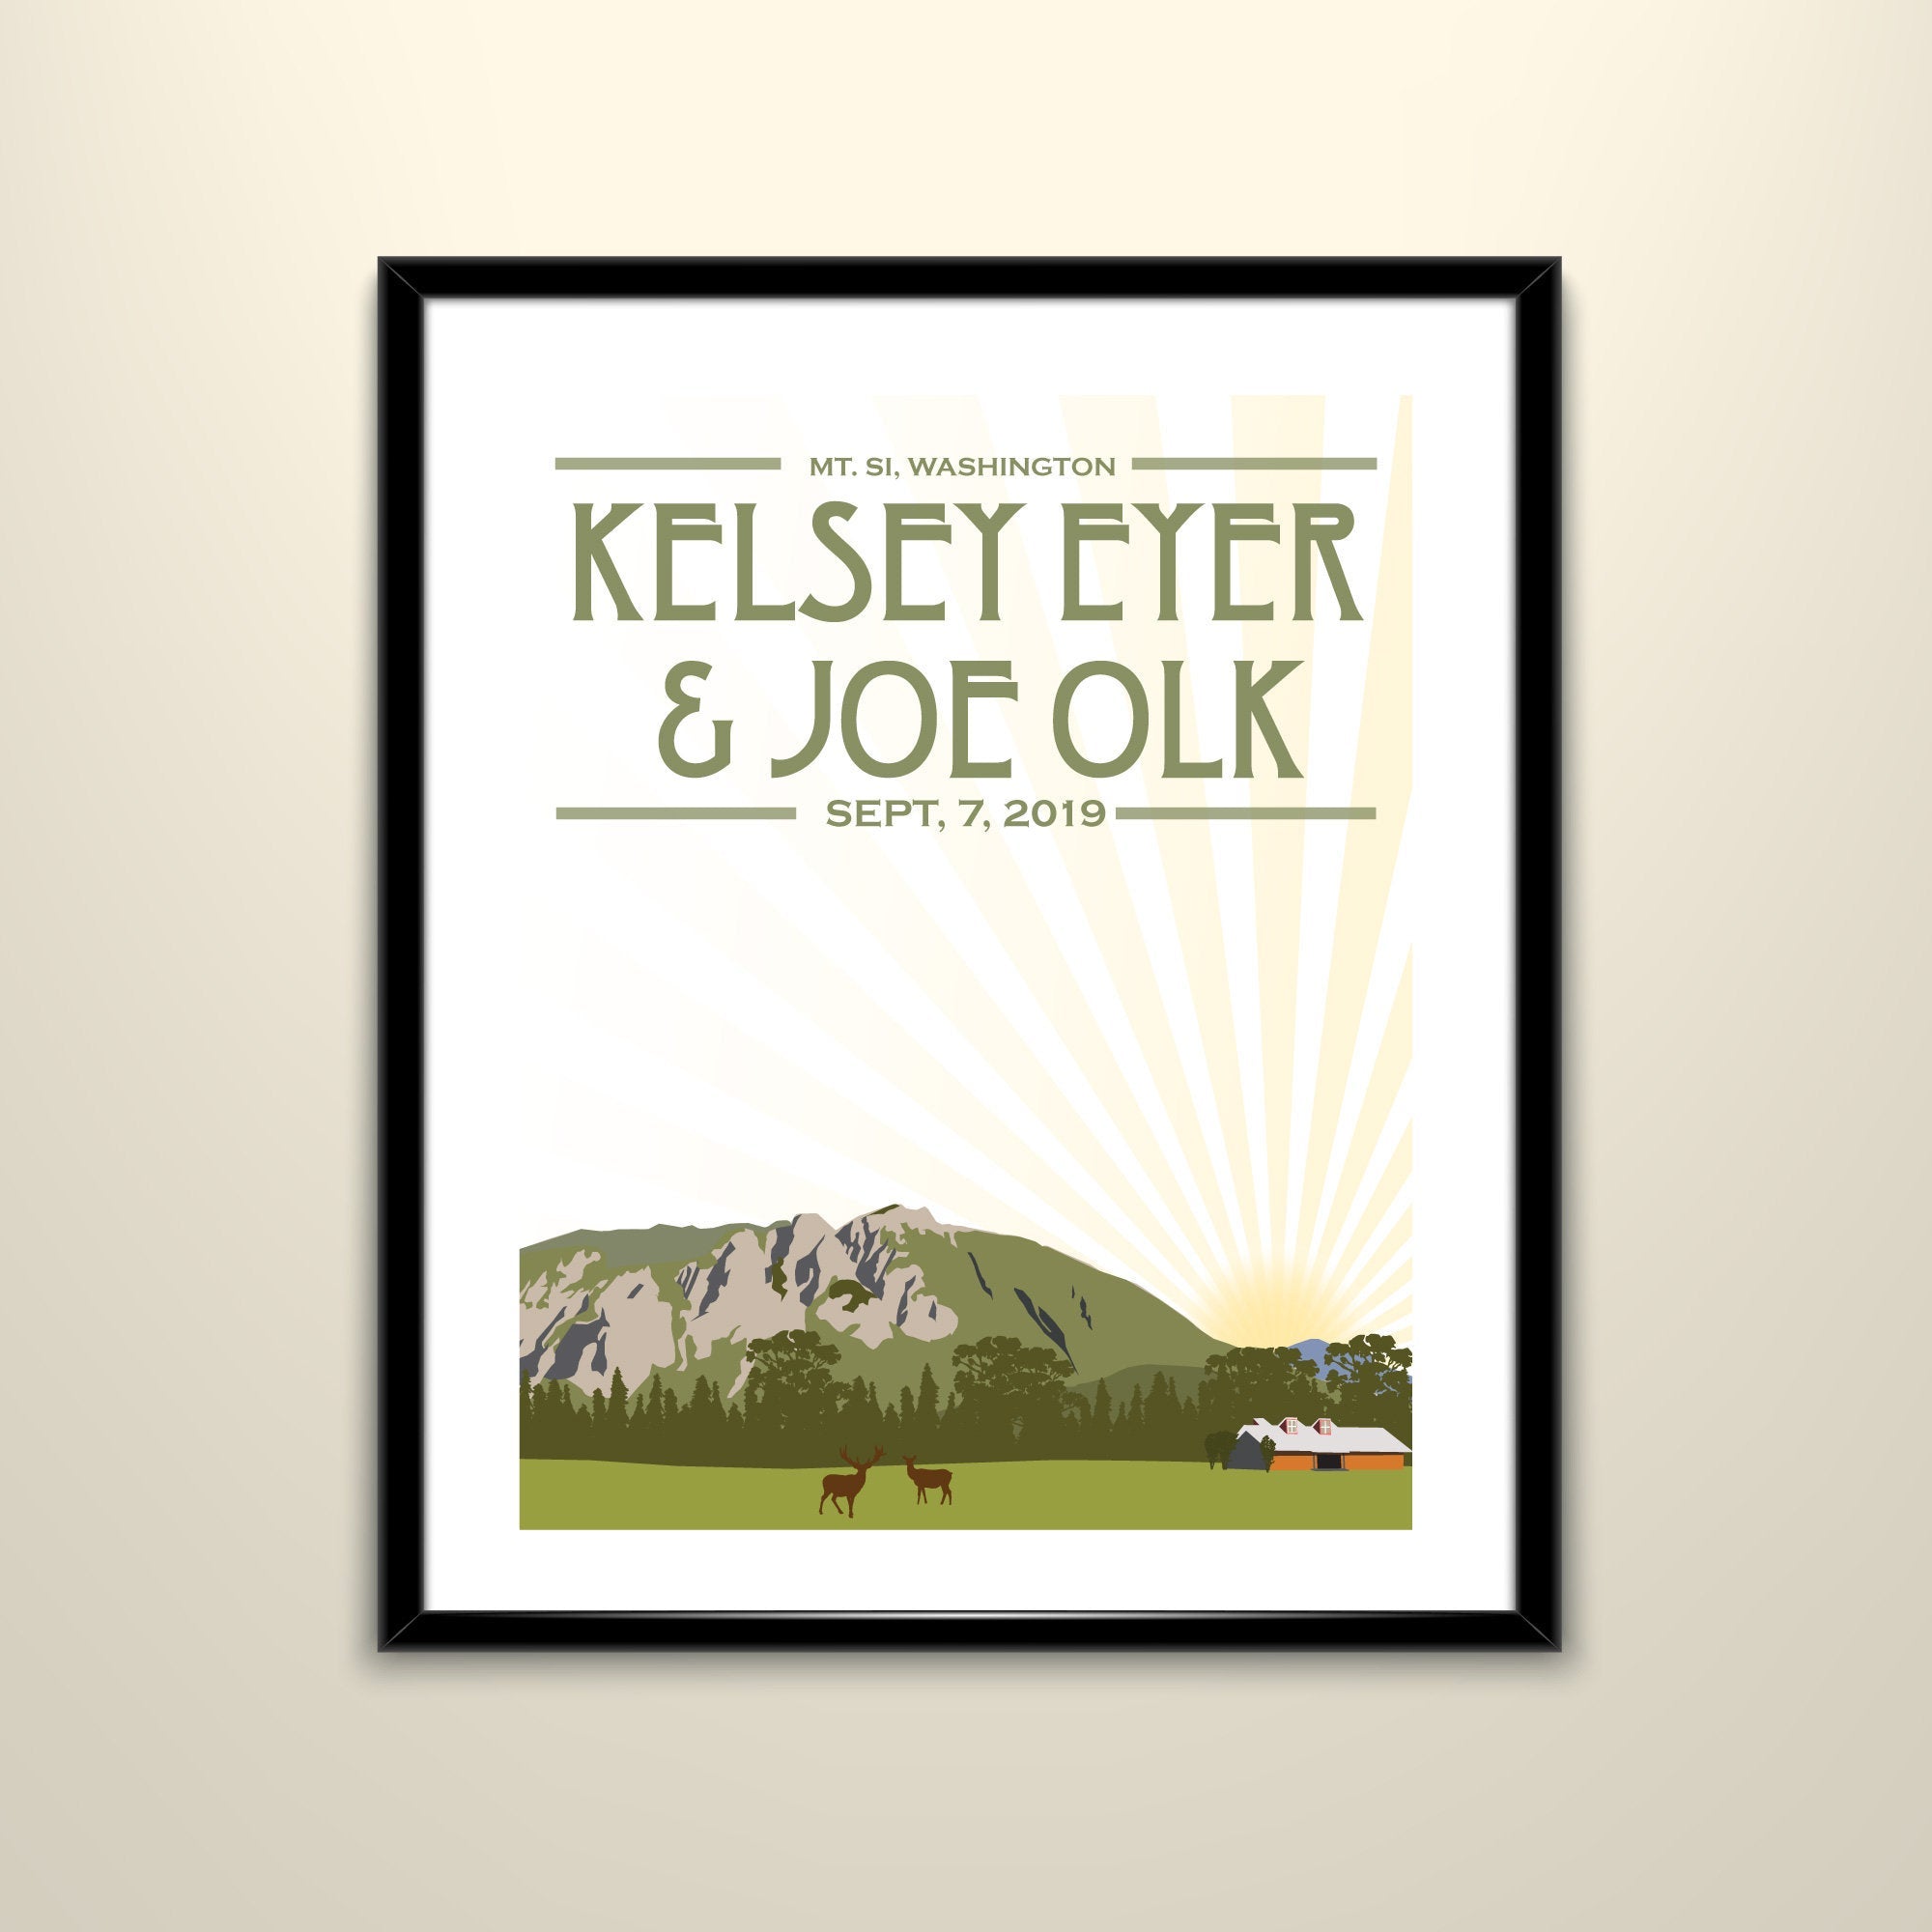 Mt. Si Washington Vintage Travel Poster - 11x14 Paper Poster - Wedding Poster personalized with Names and date (frame not included)